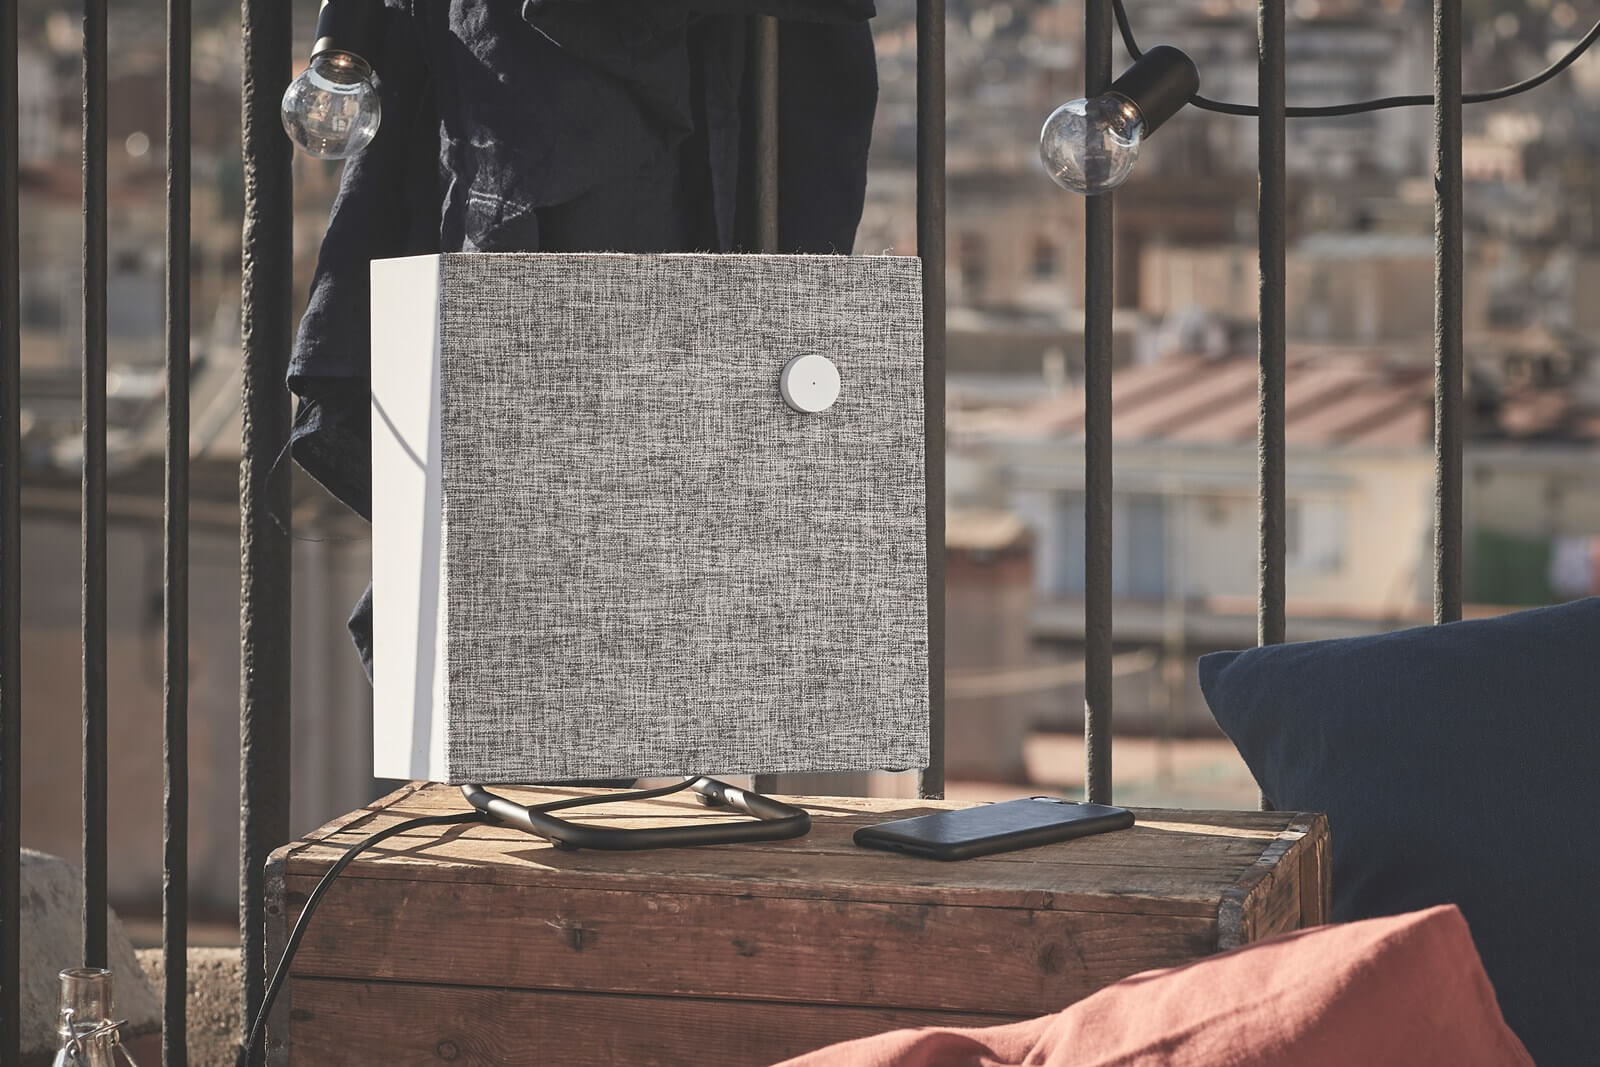 Ikea releases its first Bluetooth speakers in the US and UK